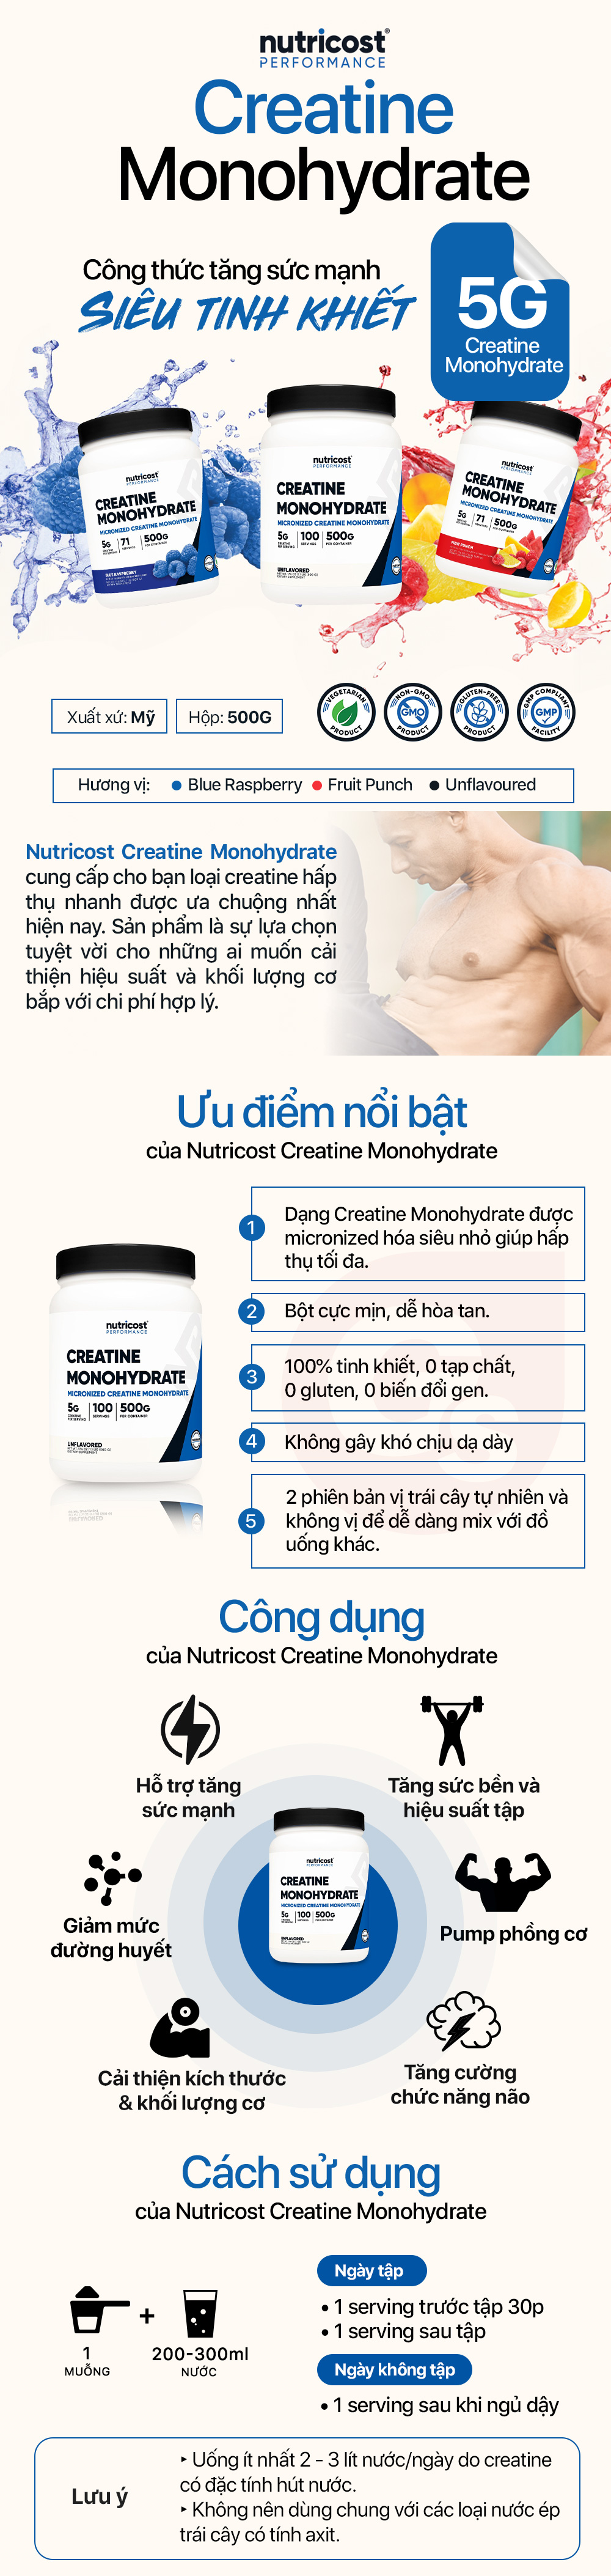 nutricost-creatine-monohydrate-powder-tang-suc-manh-suc-ben-gymstore